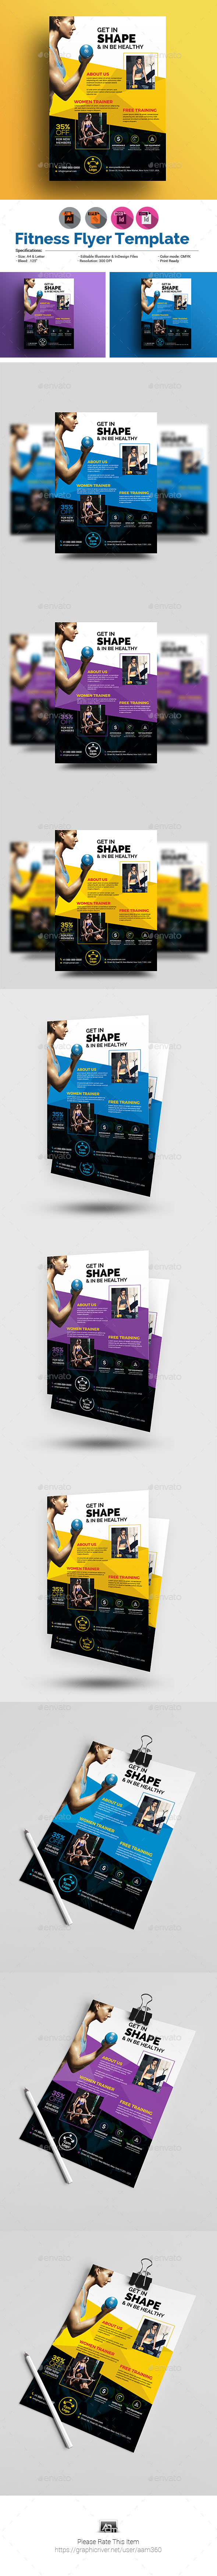 Fitness/Gym Flyer Template